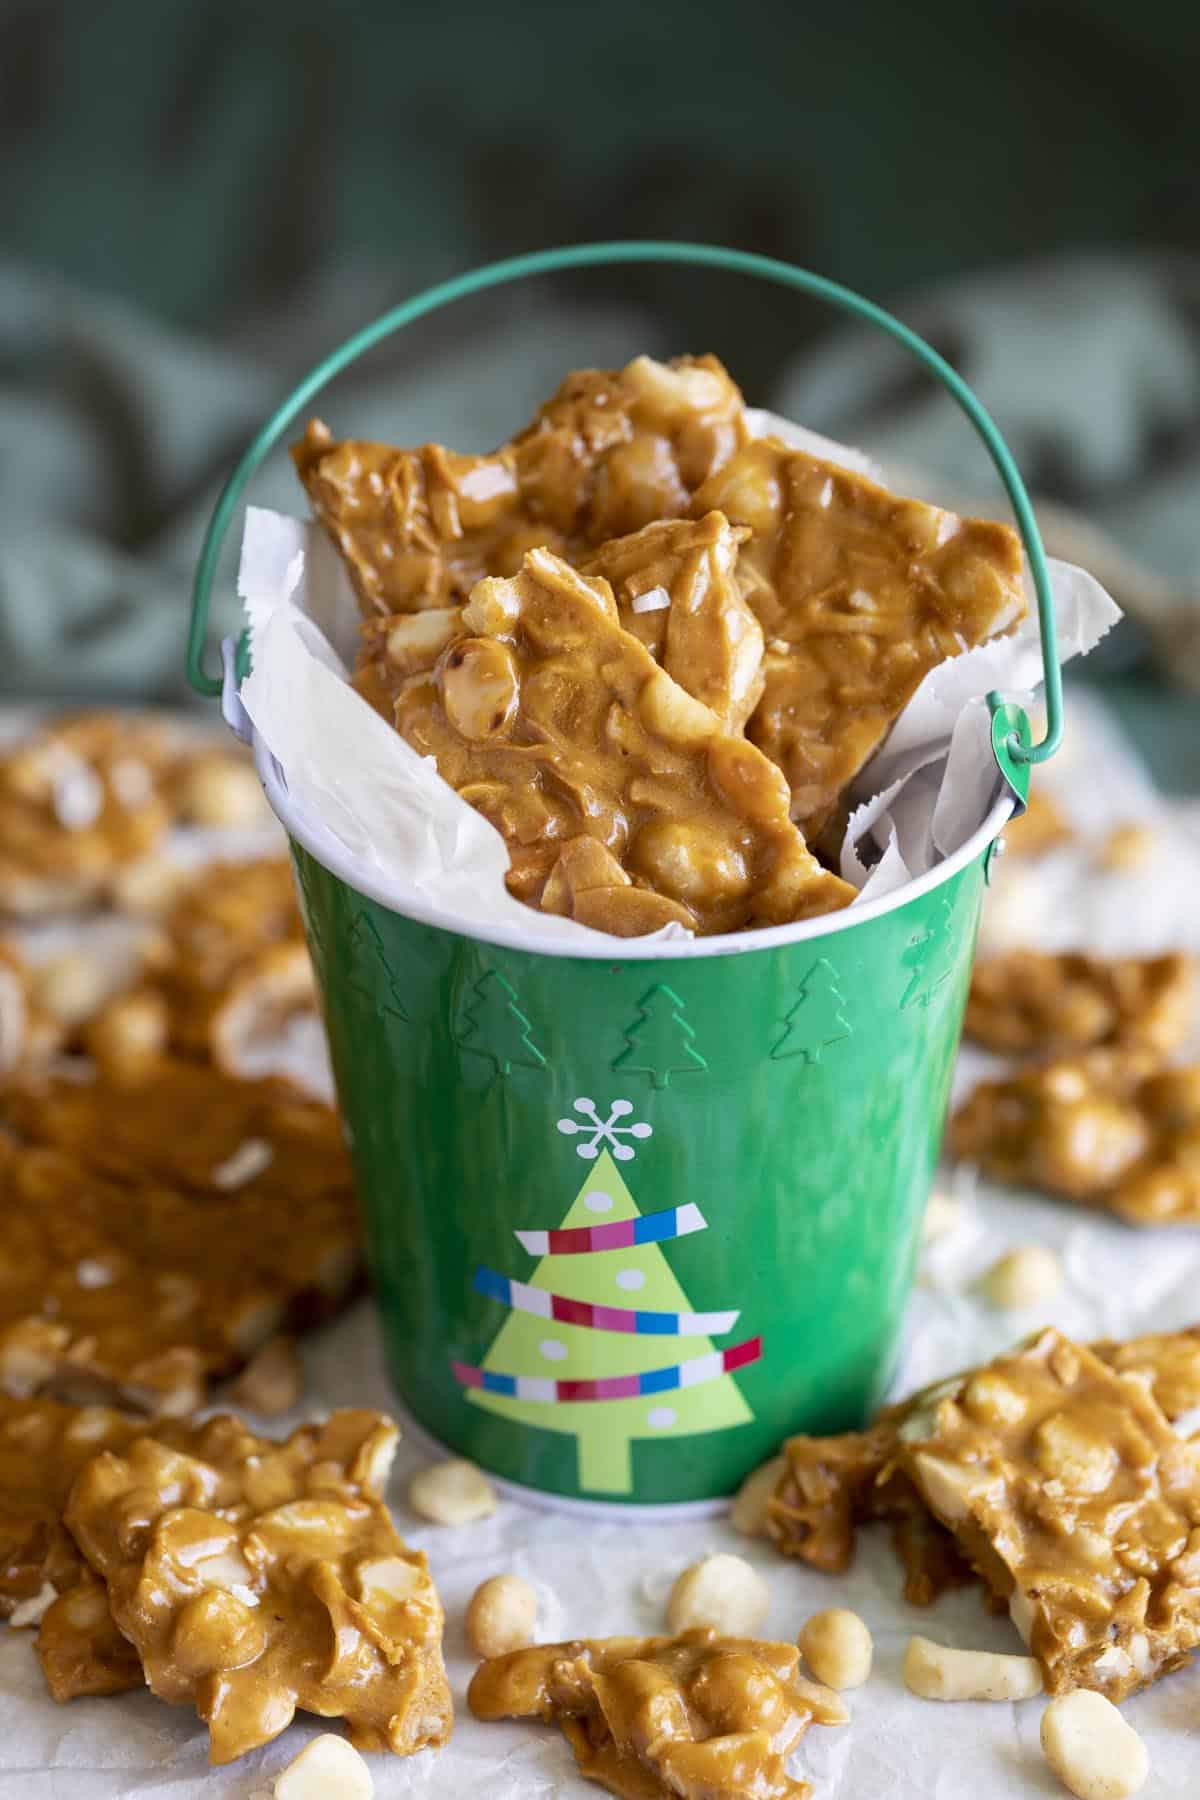 Brittle pieces in a green bucket surrounded by more brittle.